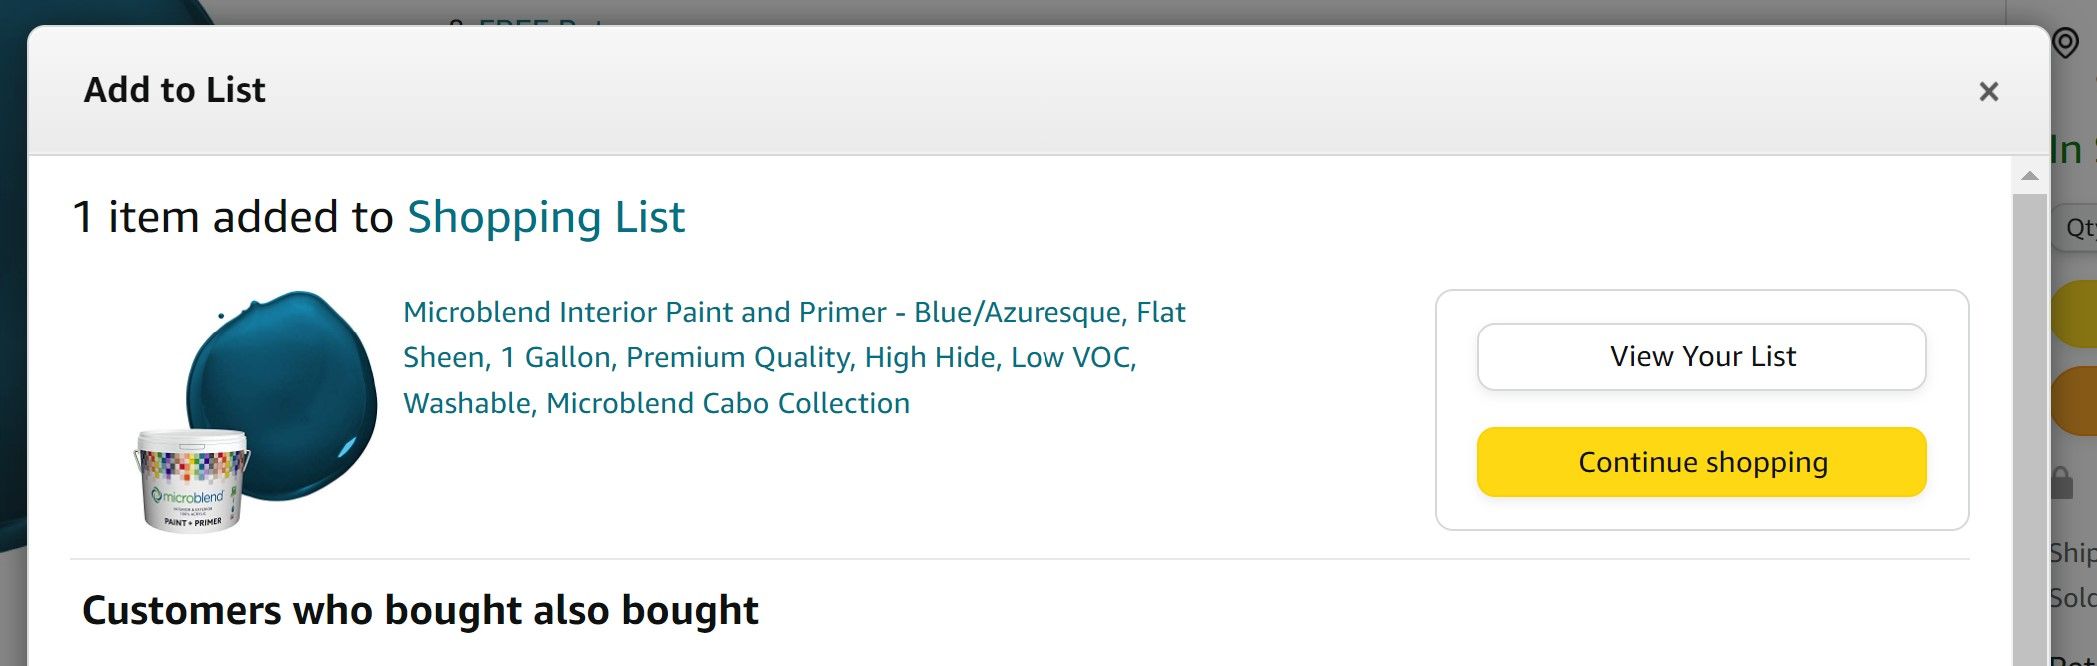 amazon shopping desktop website showing confirmation window for adding an item to a list